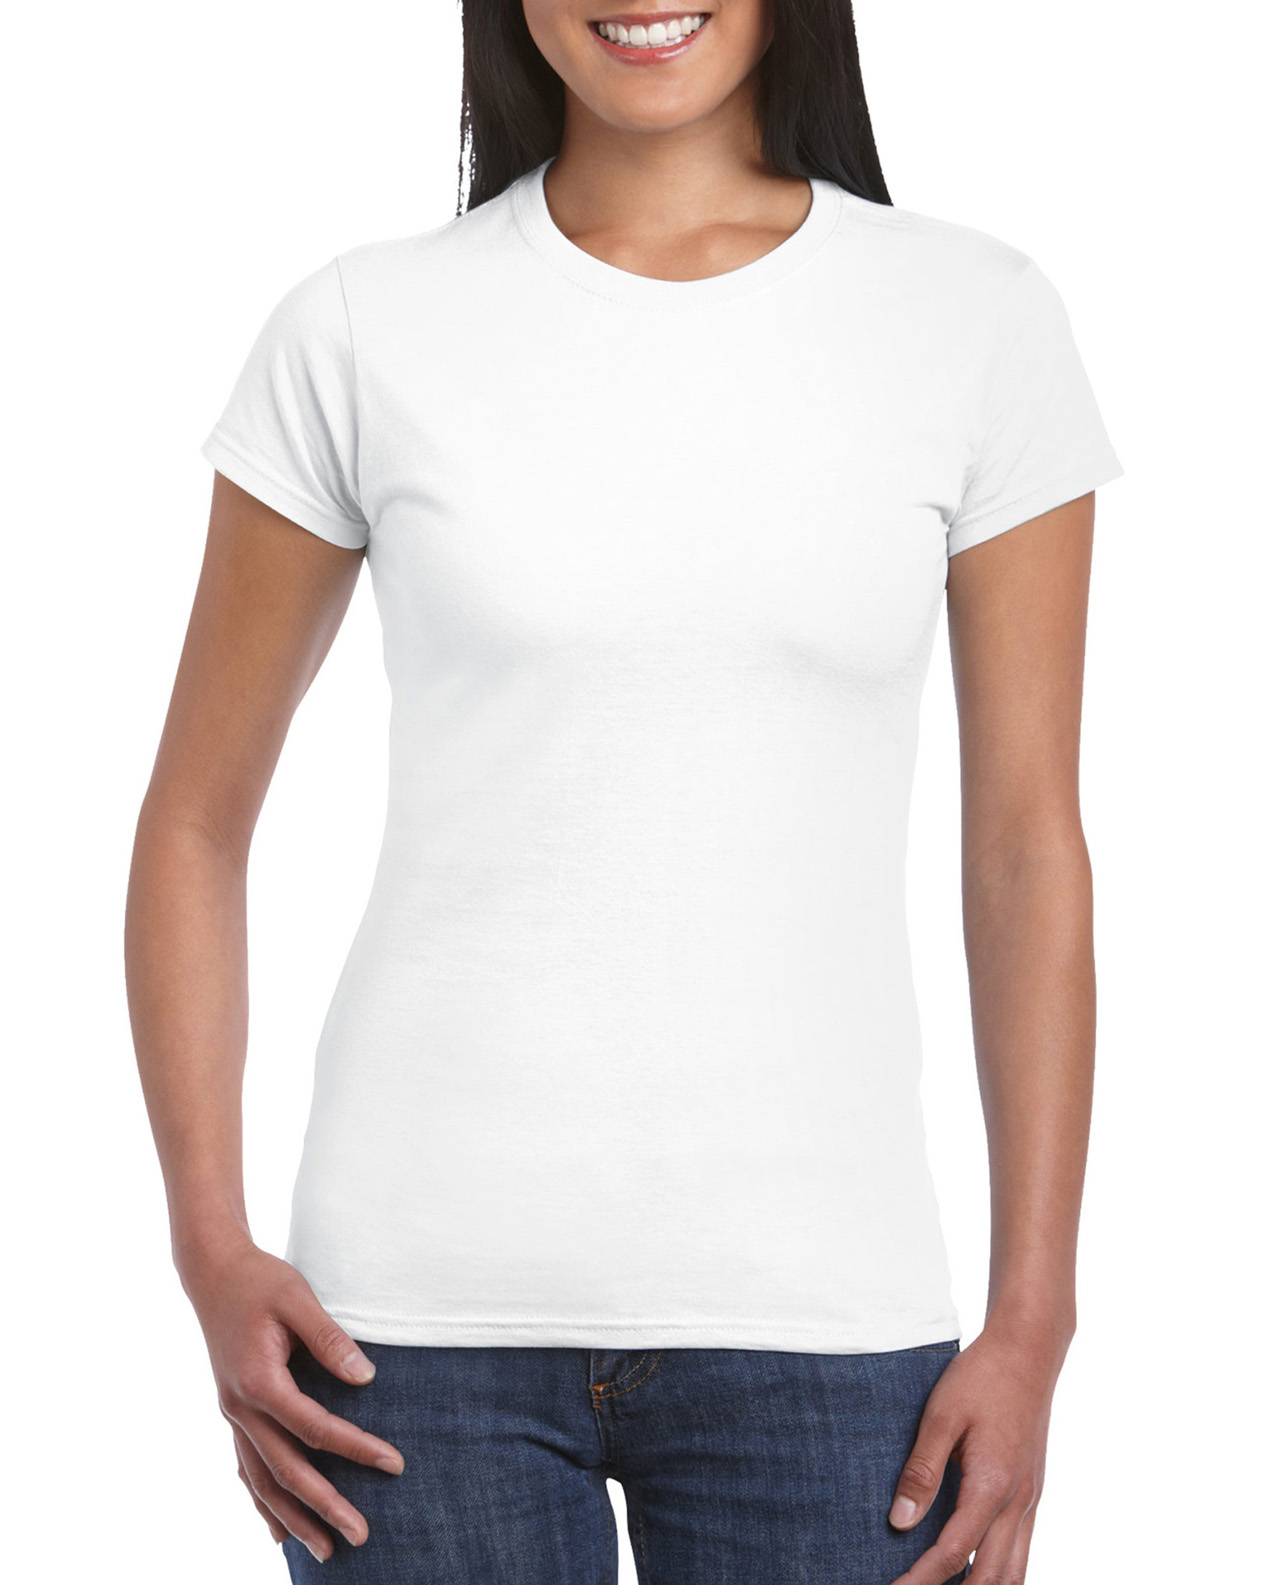 LADIES T-SHIRTS Size & Fit Guide 